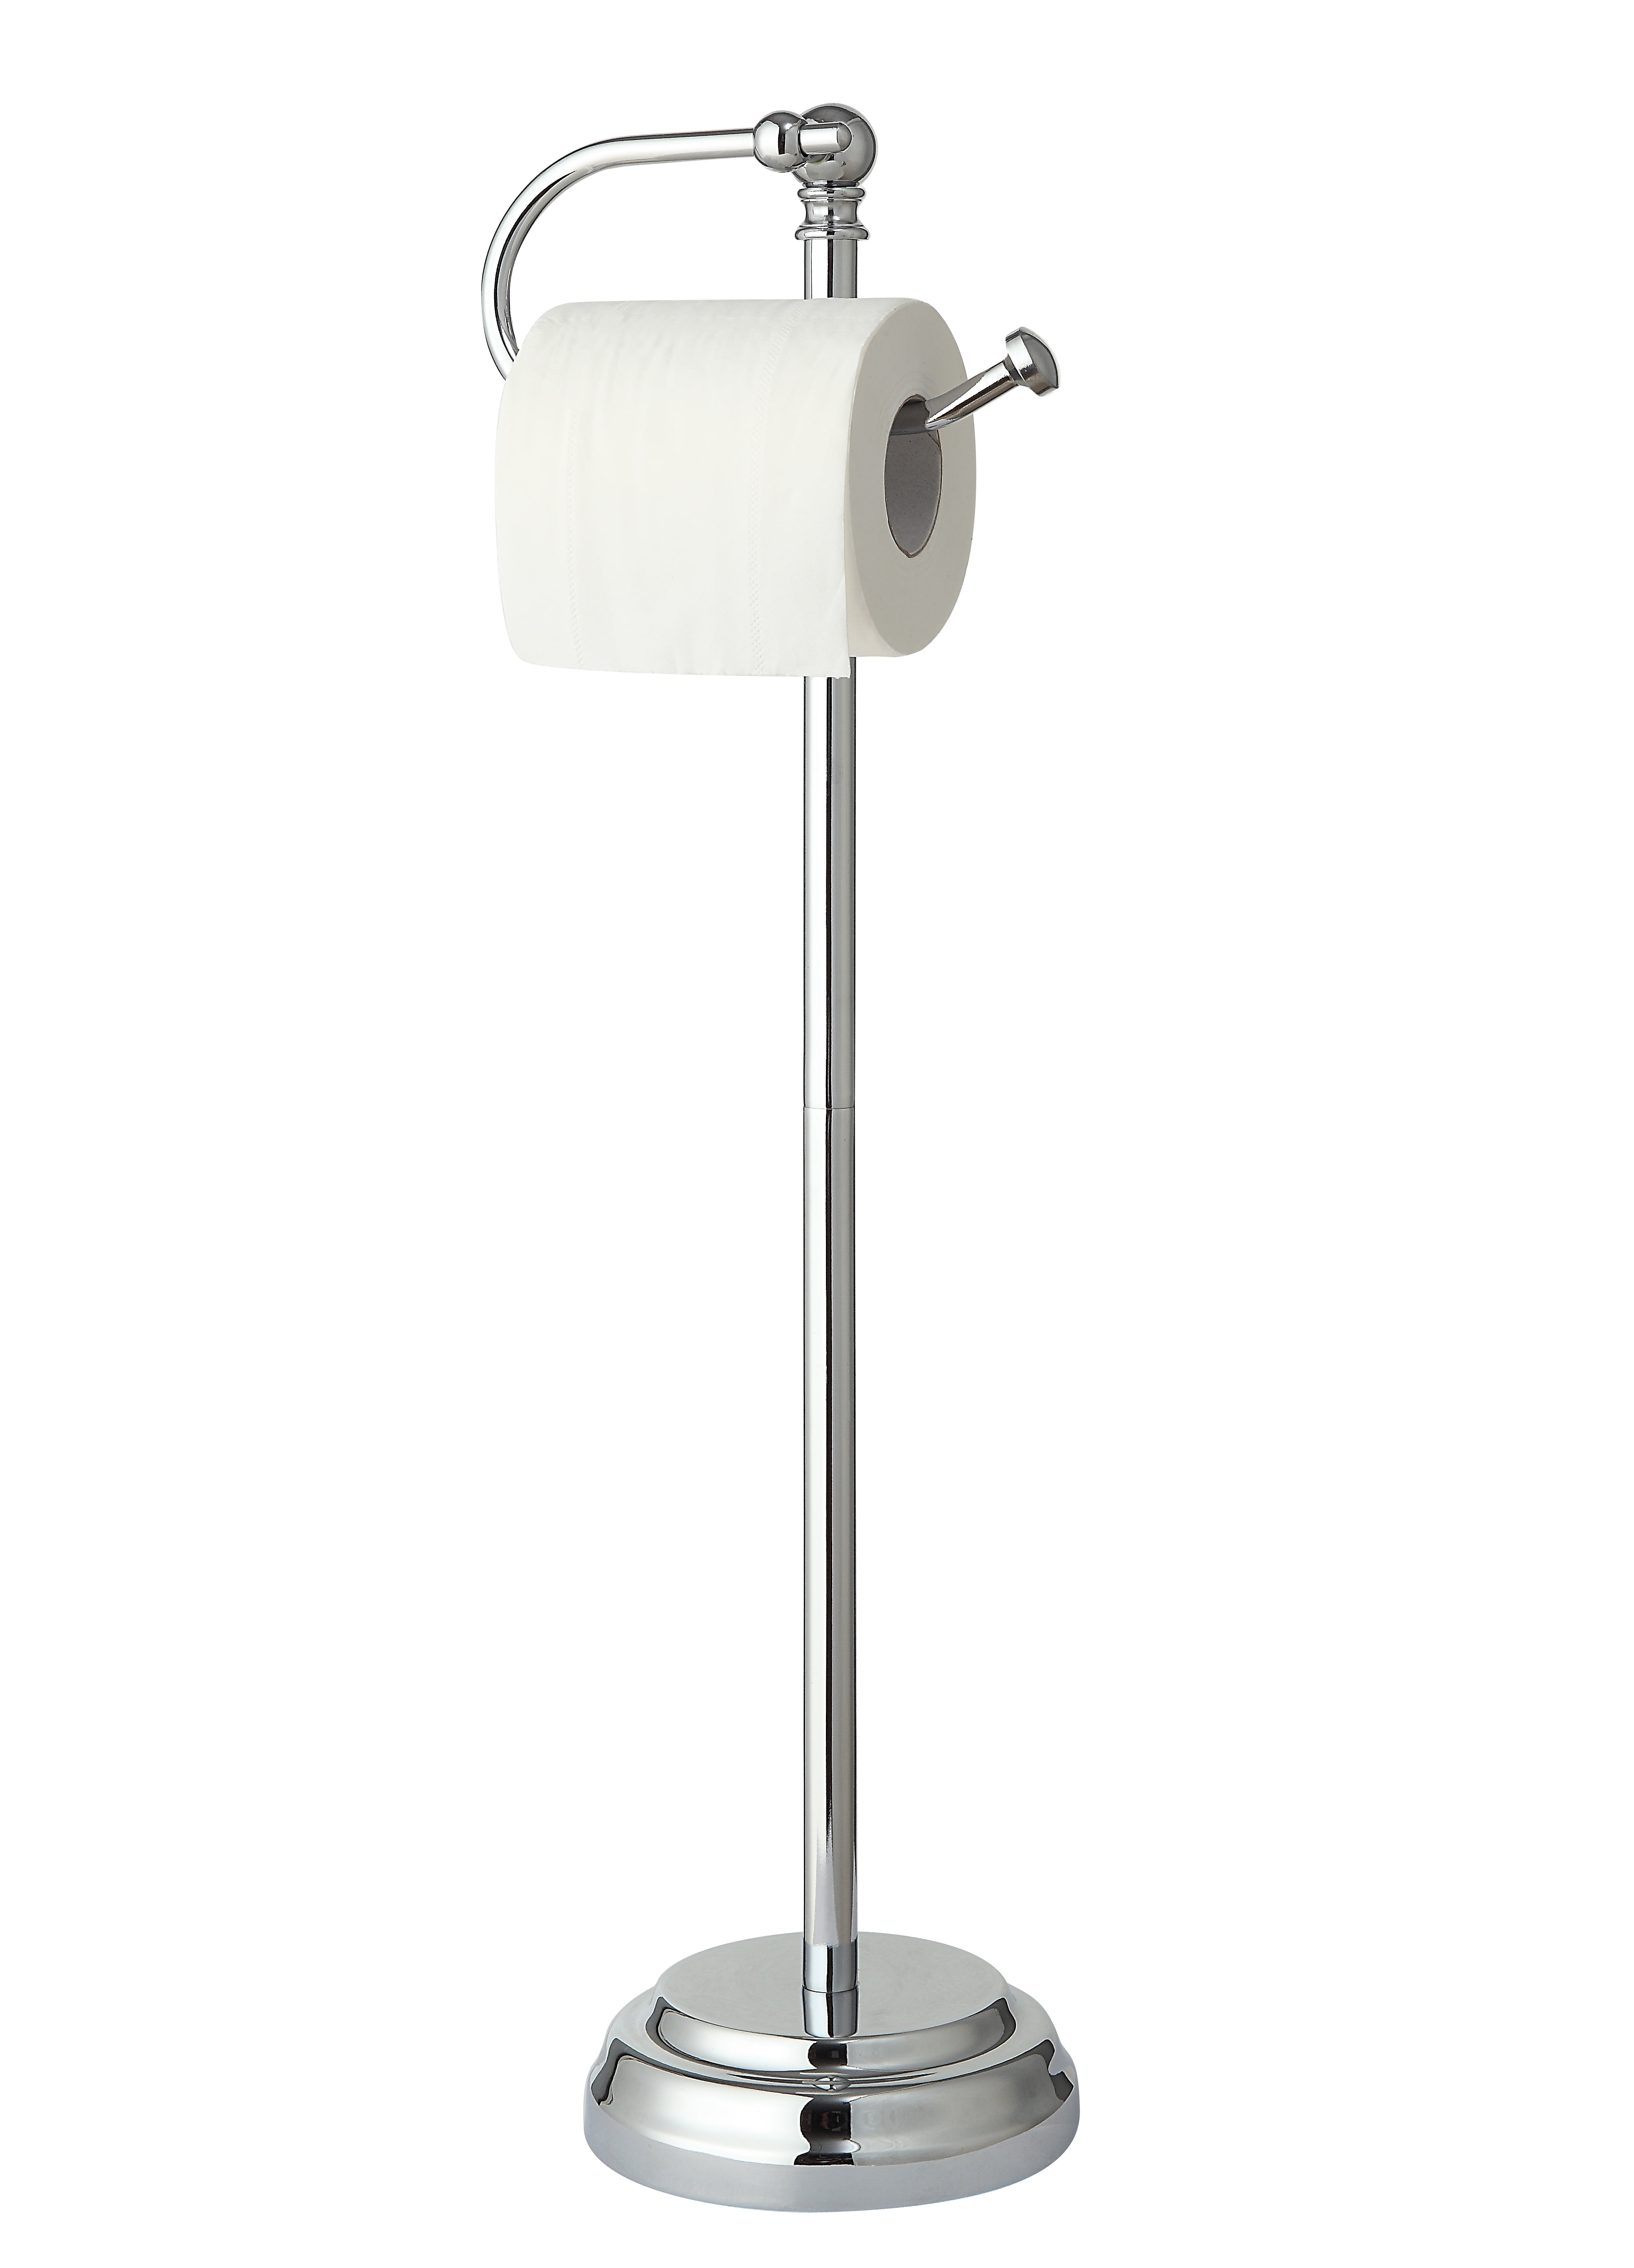 Valsan Die Cast Chrome Finish Wall Mount for Toilet Brush Holder TOP QUALITY! 